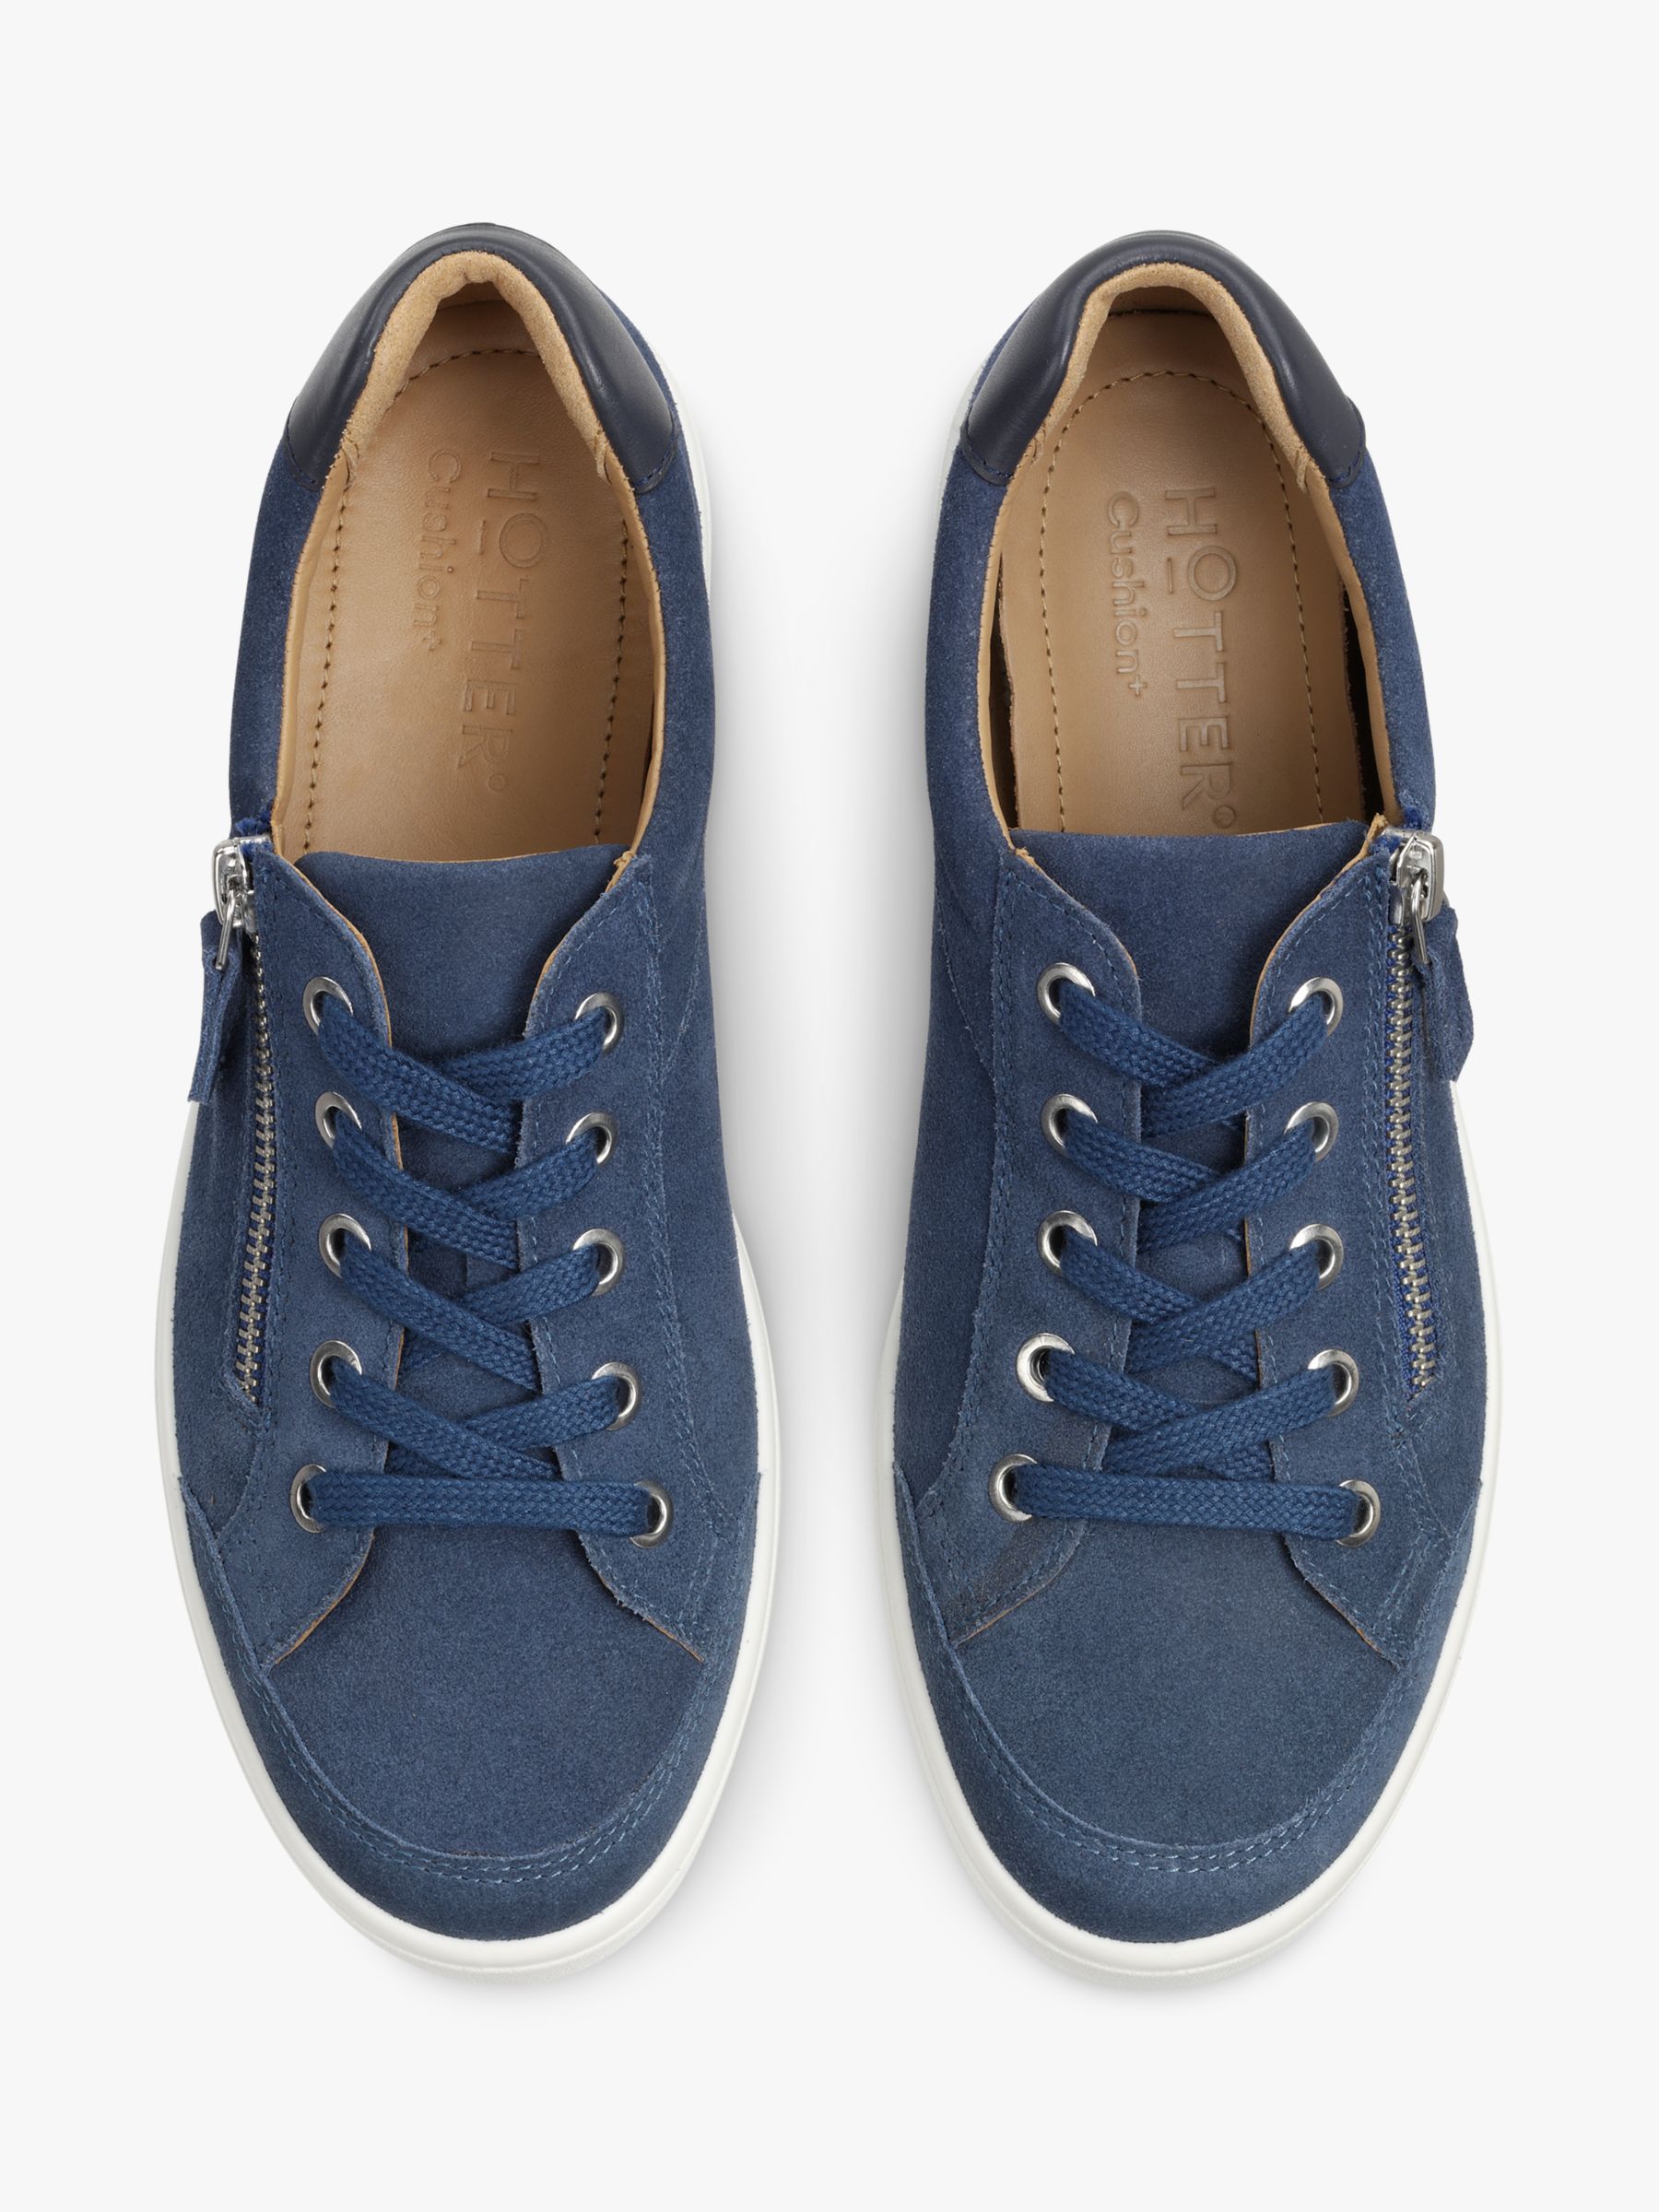 Buy Hotter Chase II Wide Fit Suede Zip and Go Trainers, Denim Blue Online at johnlewis.com